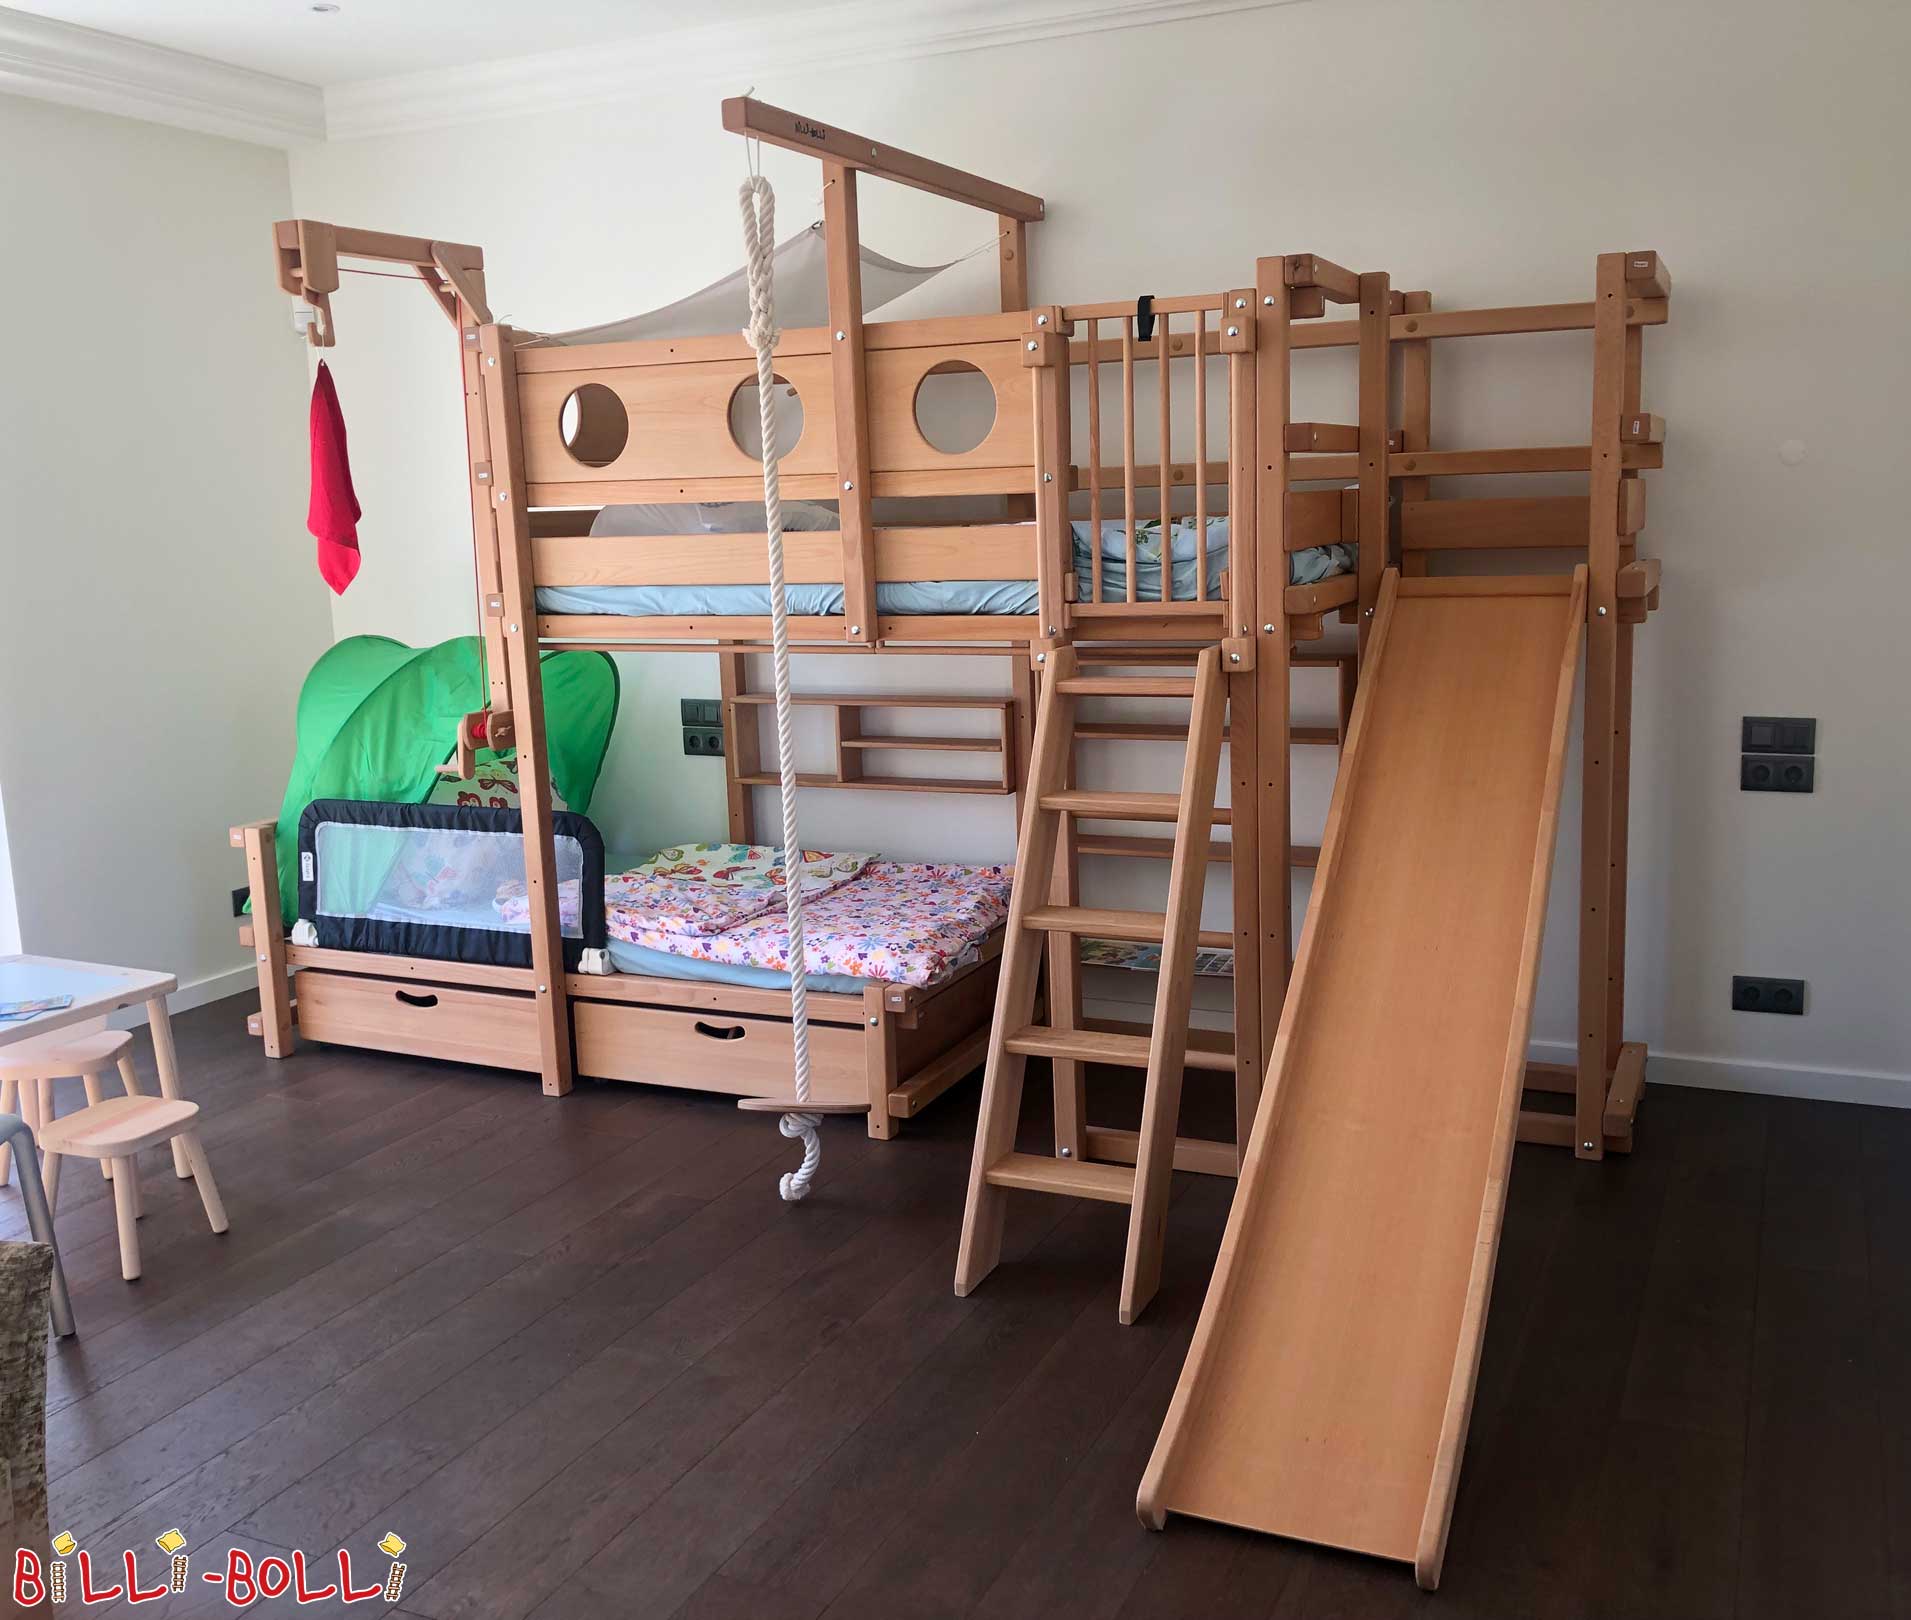 A Bunk Bed Laterally Staggered in beech, pictured here with a slide tower on … (Bunk Bed Laterally Staggered)